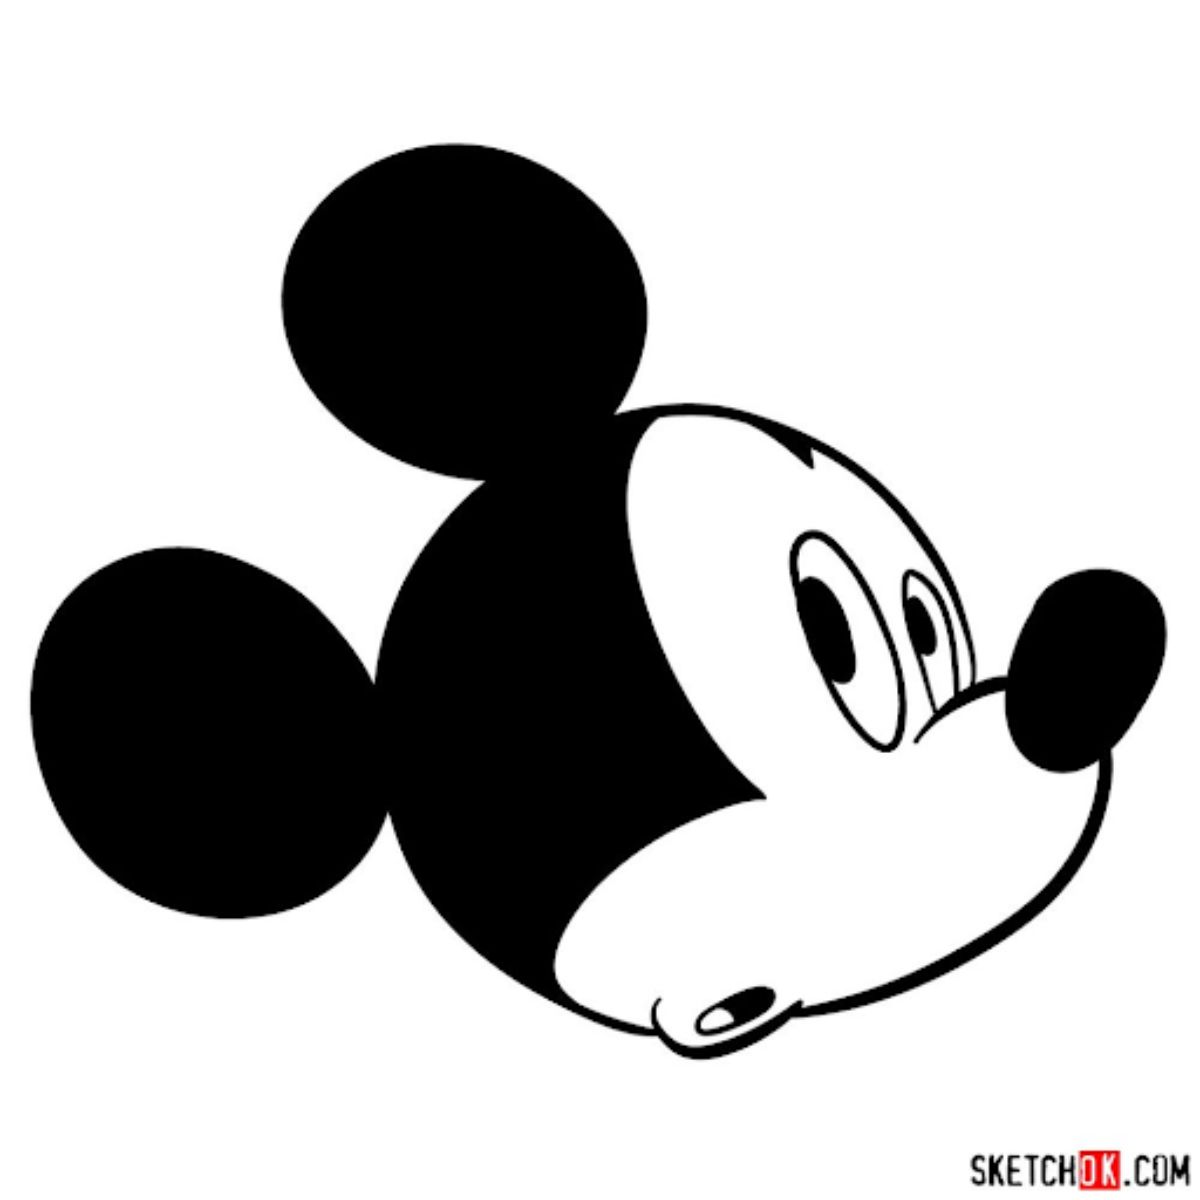 mickey mouse drawing step by step easy - YouTube-vachngandaiphat.com.vn